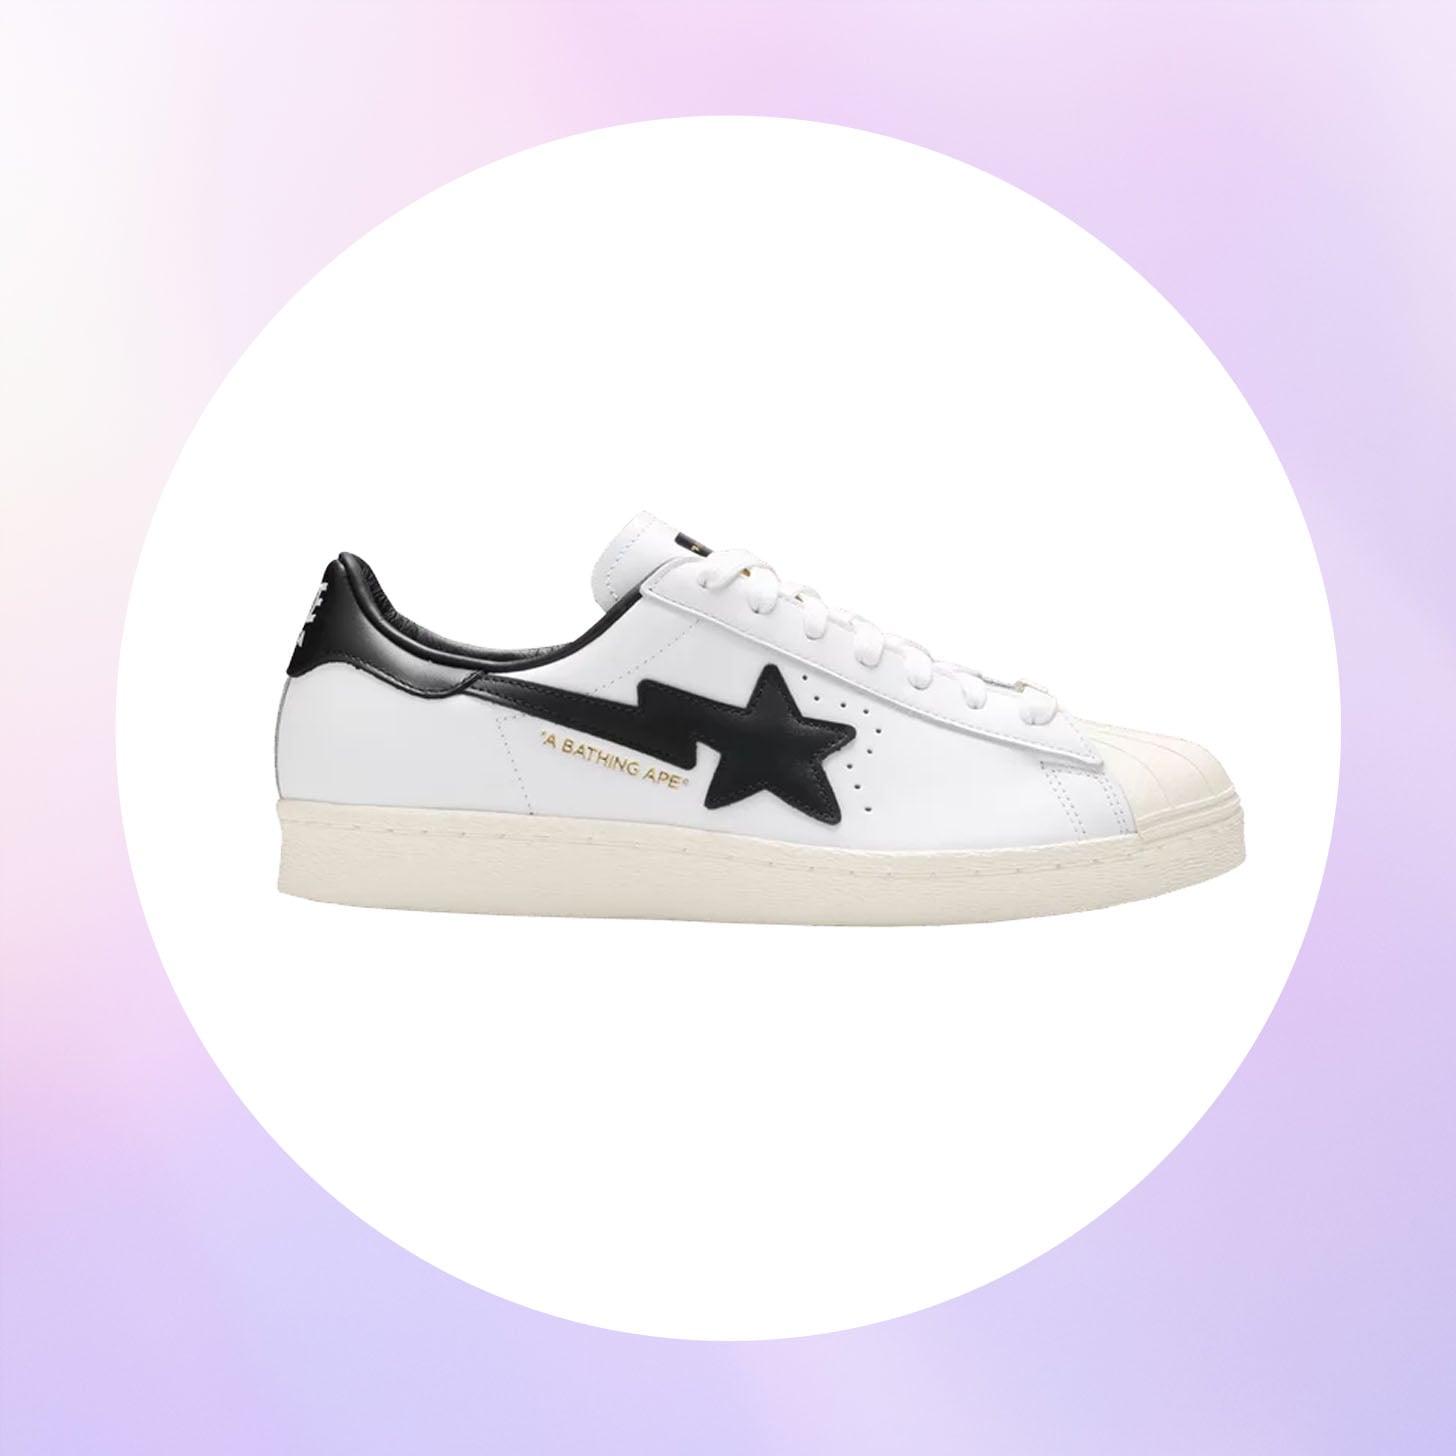 Top 6 Must-Get OFF-WHITE Sneakers To Buy Now